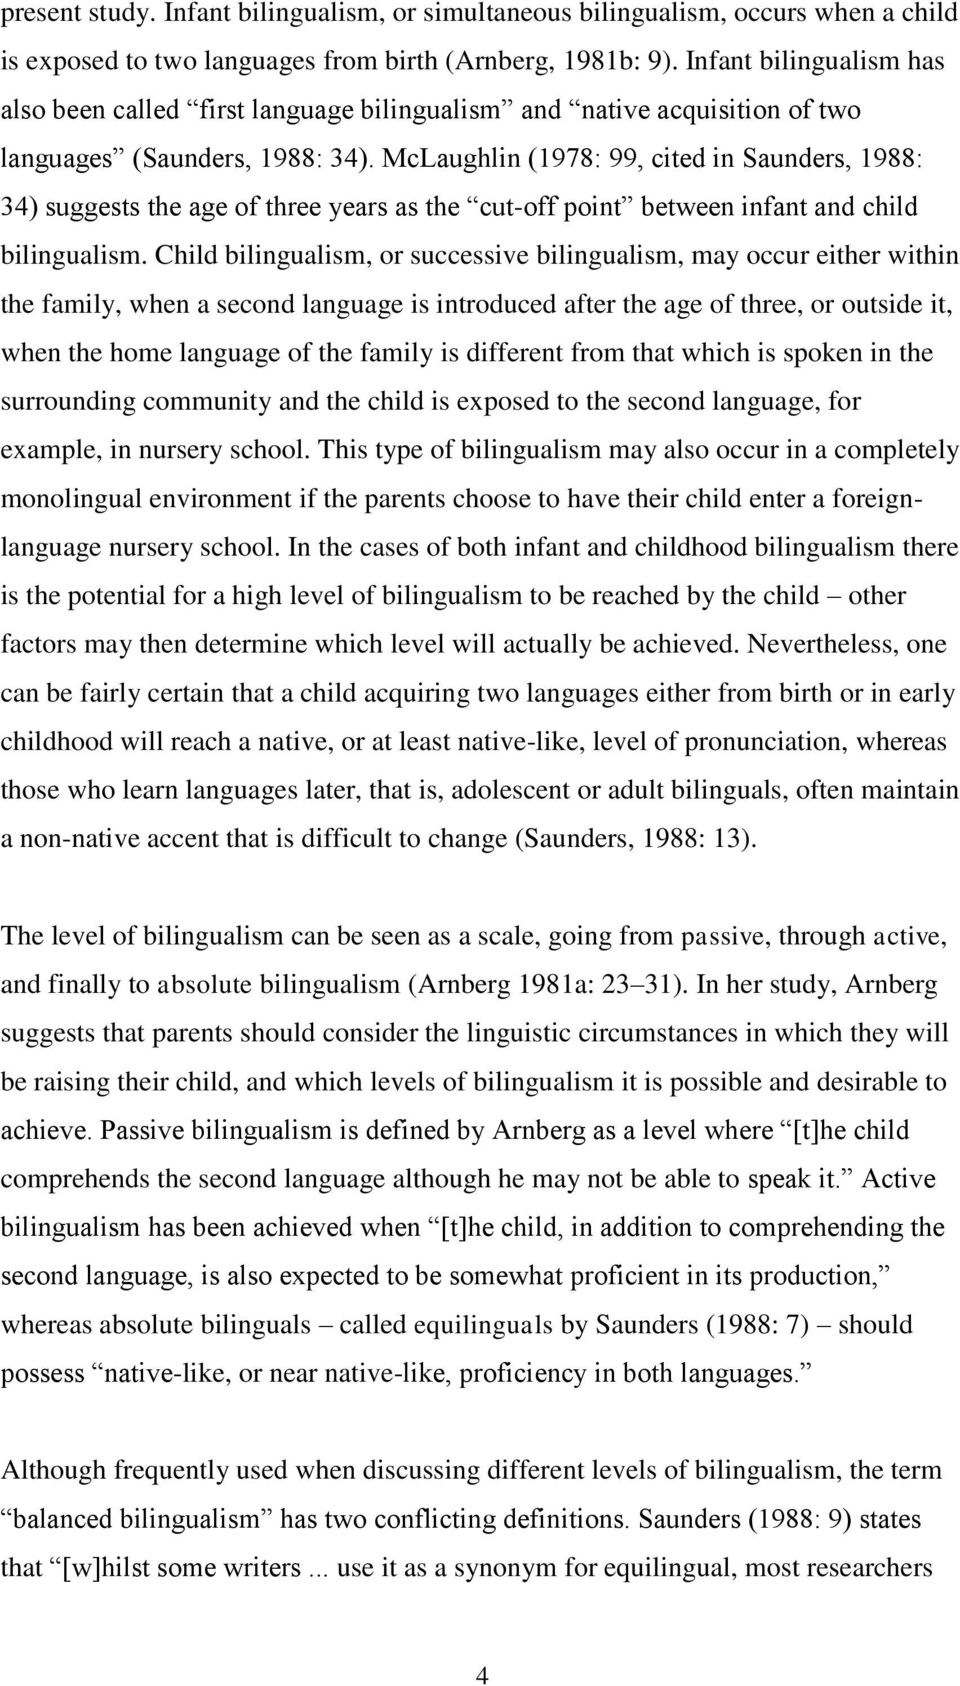 McLaughlin (1978: 99, cited in Saunders, 1988: 34) suggests the age of three years as the cut-off point between infant and child bilingualism.